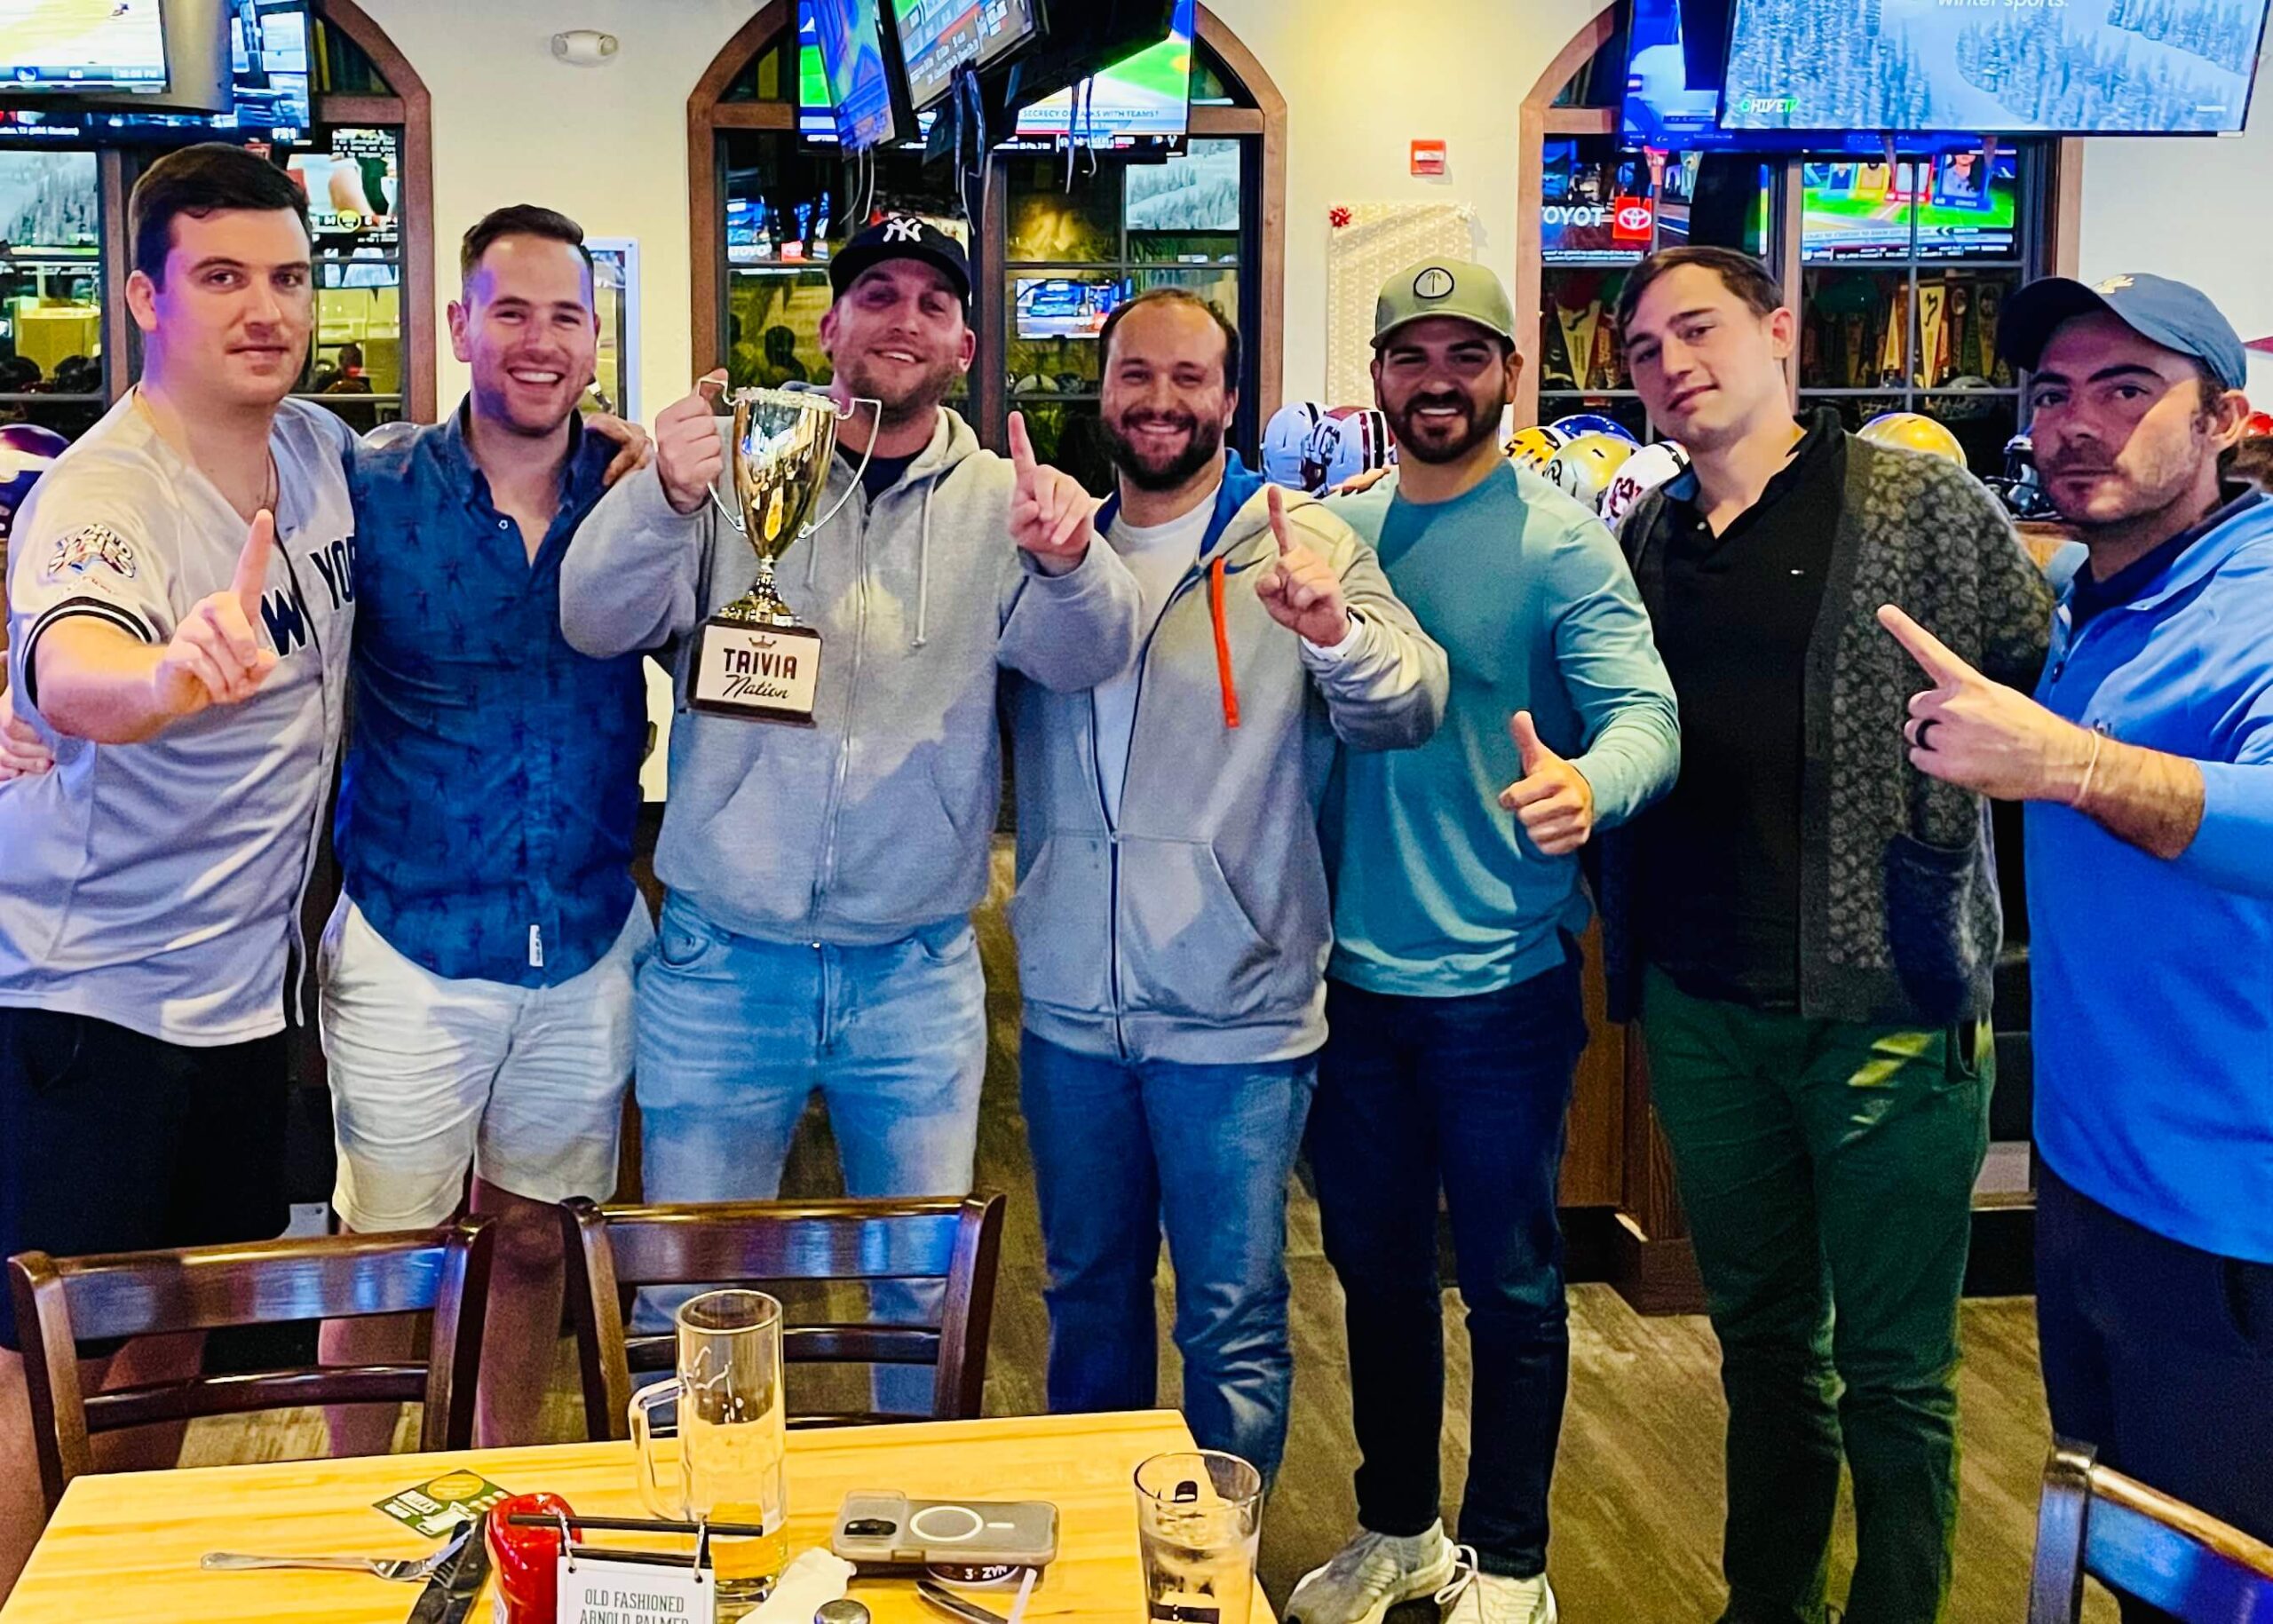 Duffy's Sports Grill Tampa FL 33607 trivia night: group of seven men standing together in a line all smiling and holding up their hands in a number one gesture with one man in the middle holding up a Trivia Nation trophy